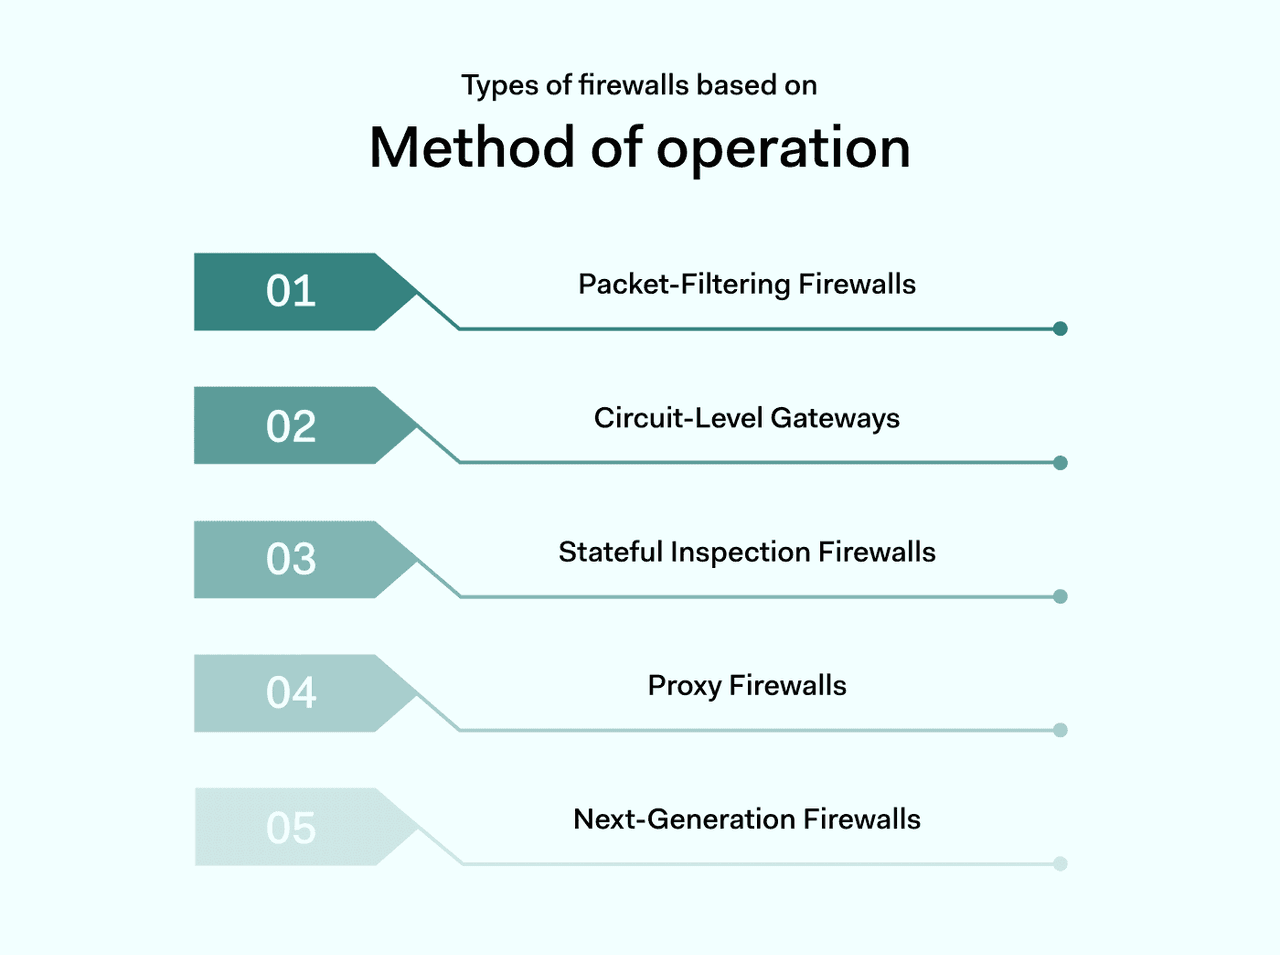 Types of firewalls by method of operation